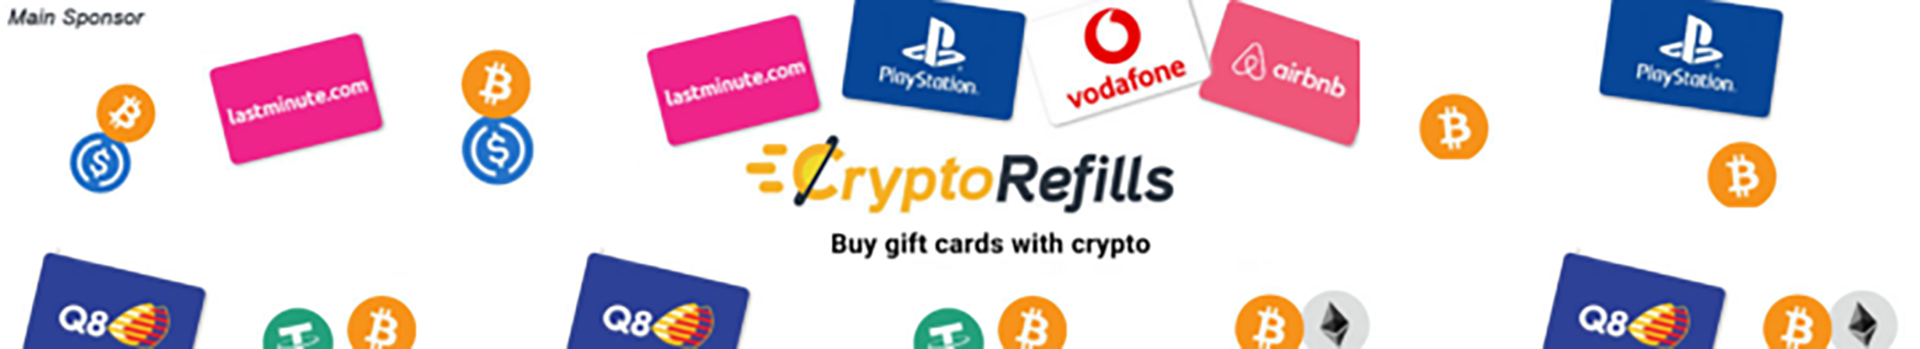 Buy gift cards with Crypto at CryptoRefills